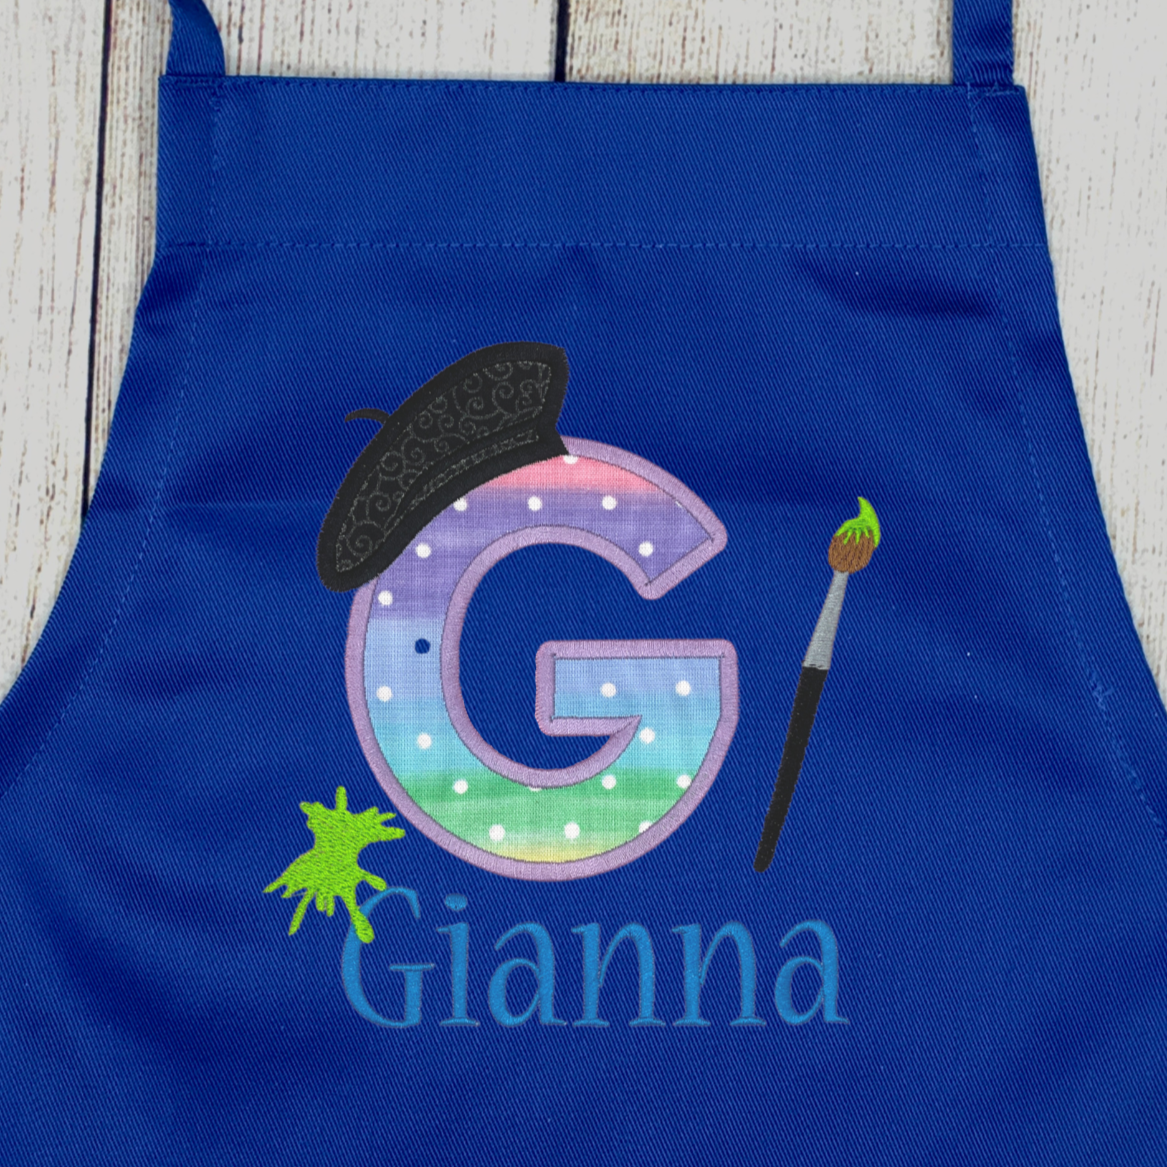 Girls Personalized Embroidered Art Apron for Arts & Crats or Painting